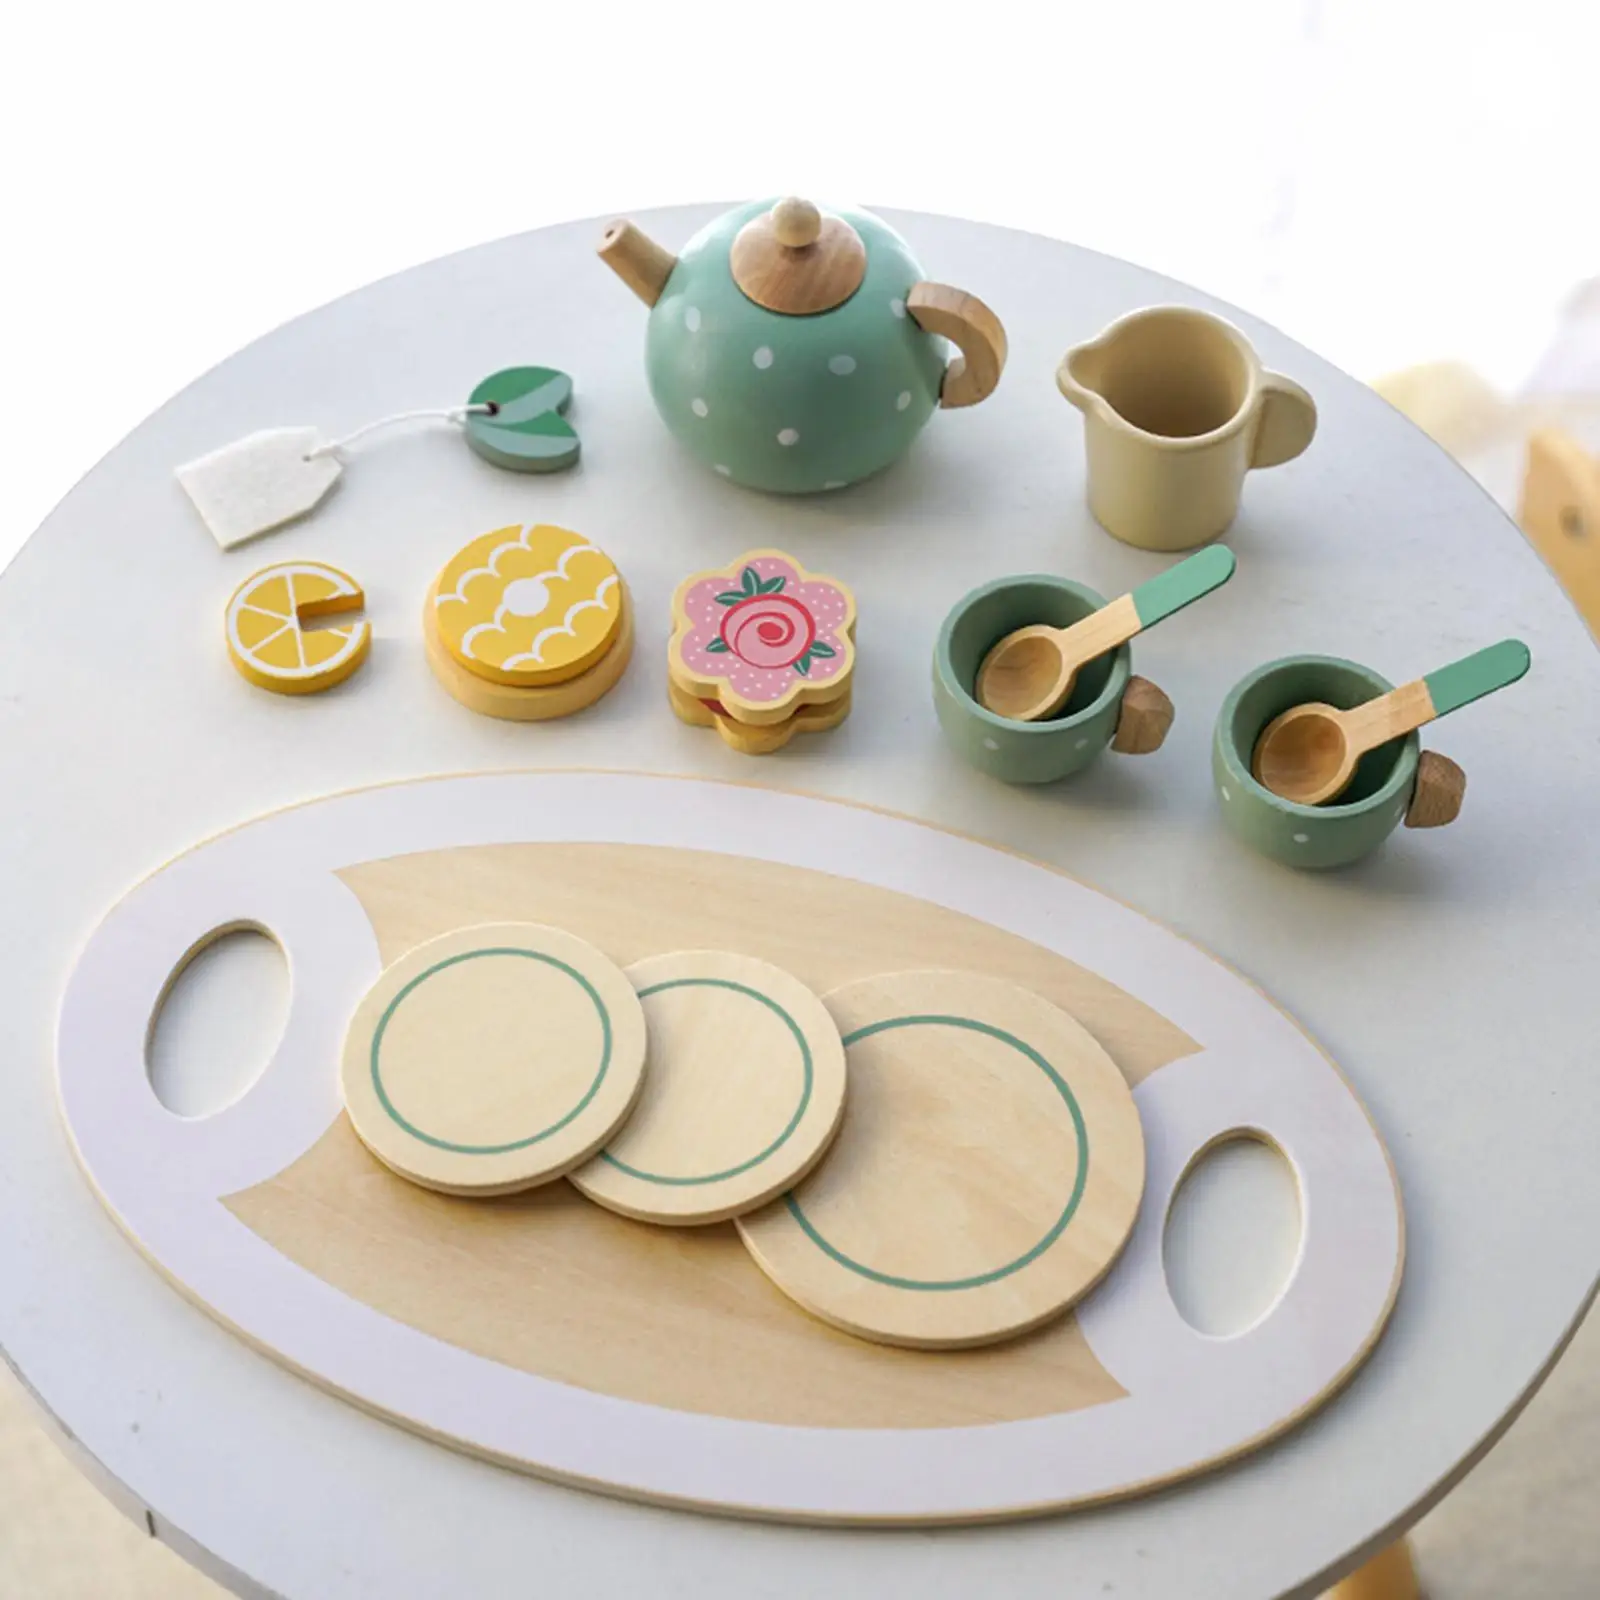 15Pcs Tea Party Developmental Toy Montessori for Kids Ages 3 4 5 Years Old